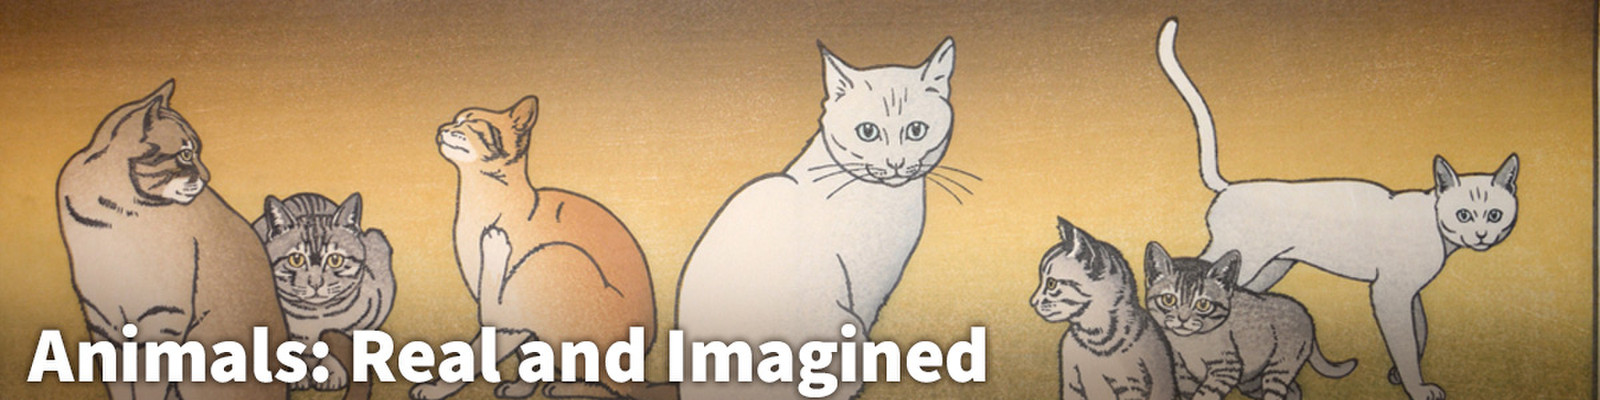 Animals Real and imagined